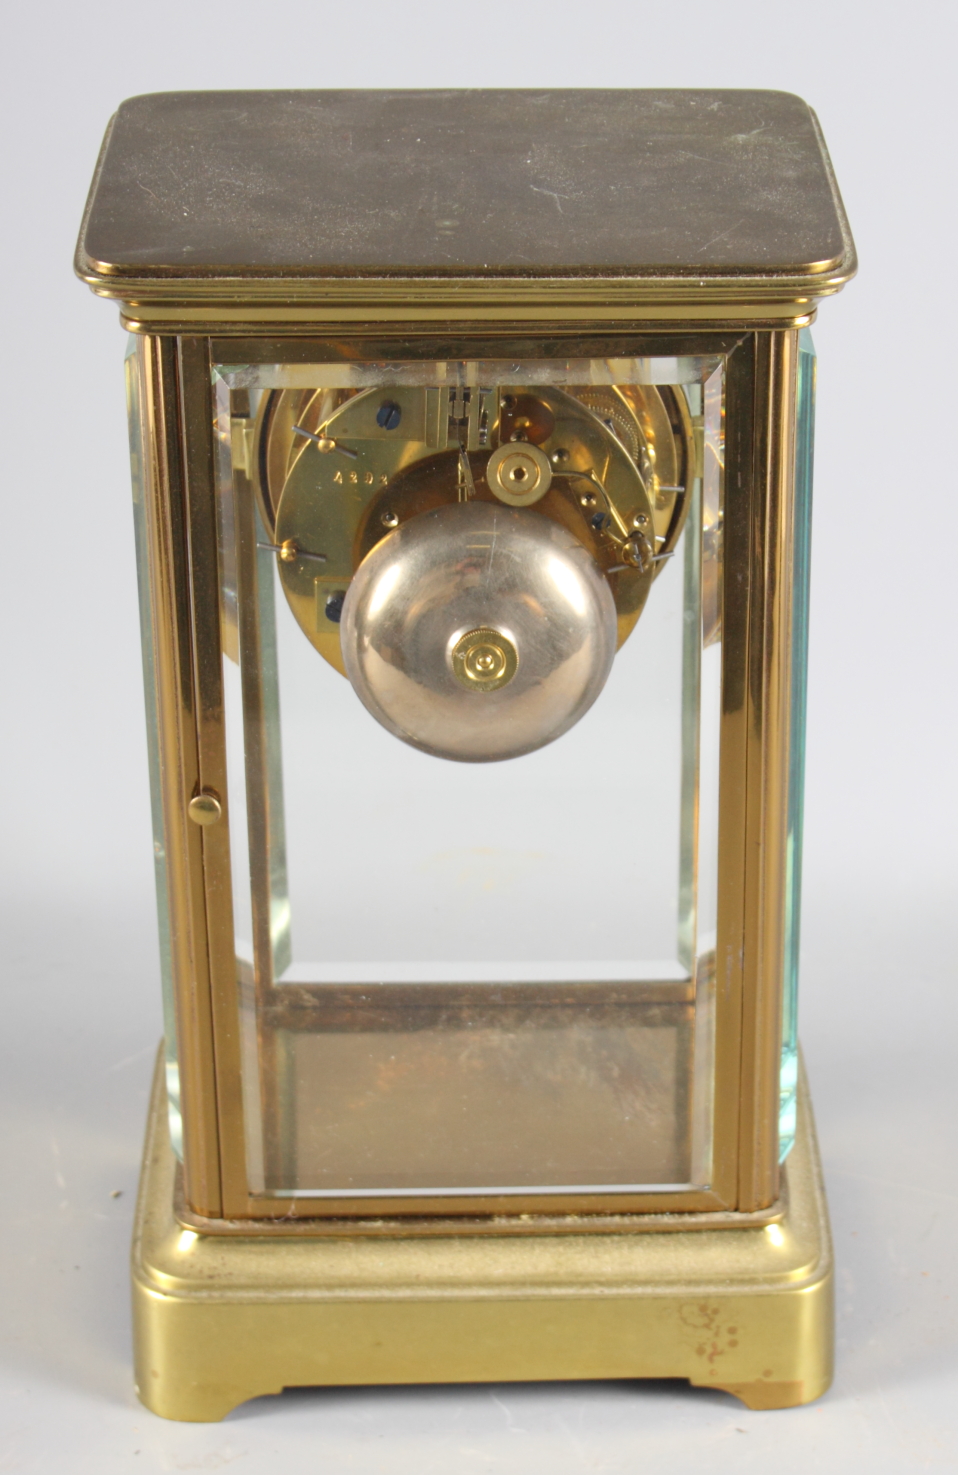 A 19th Century brass cased four-glass clock with white enamel dial and striking movement, 10 1/2" - Image 3 of 8